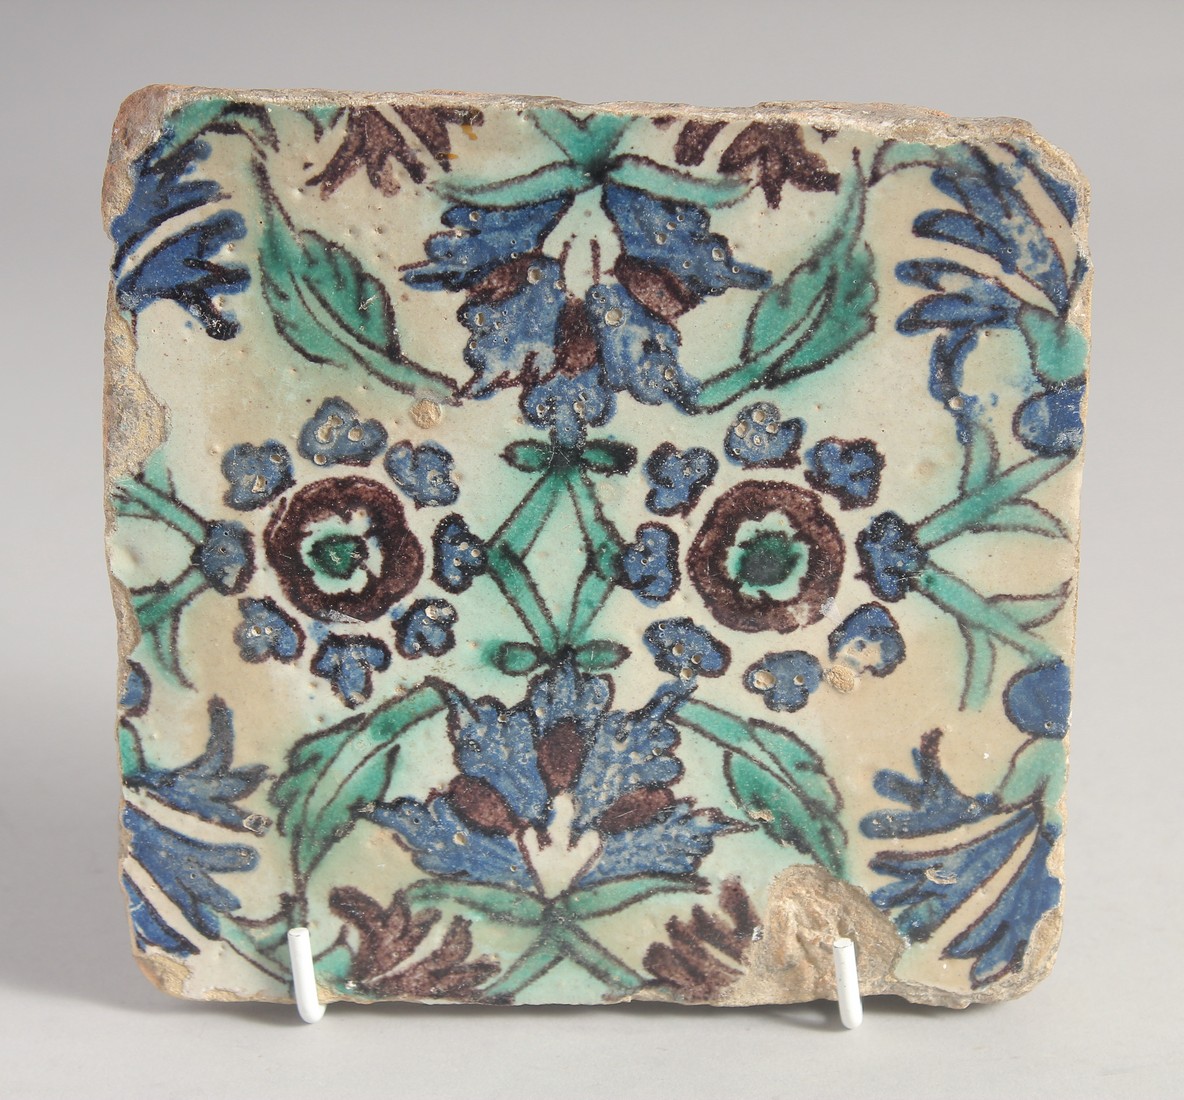 AN 18TH CENTURY NORTH AFRICAN TUNISIAN GLAZED POTTERY TILE, painted with floral motif. 15cm square